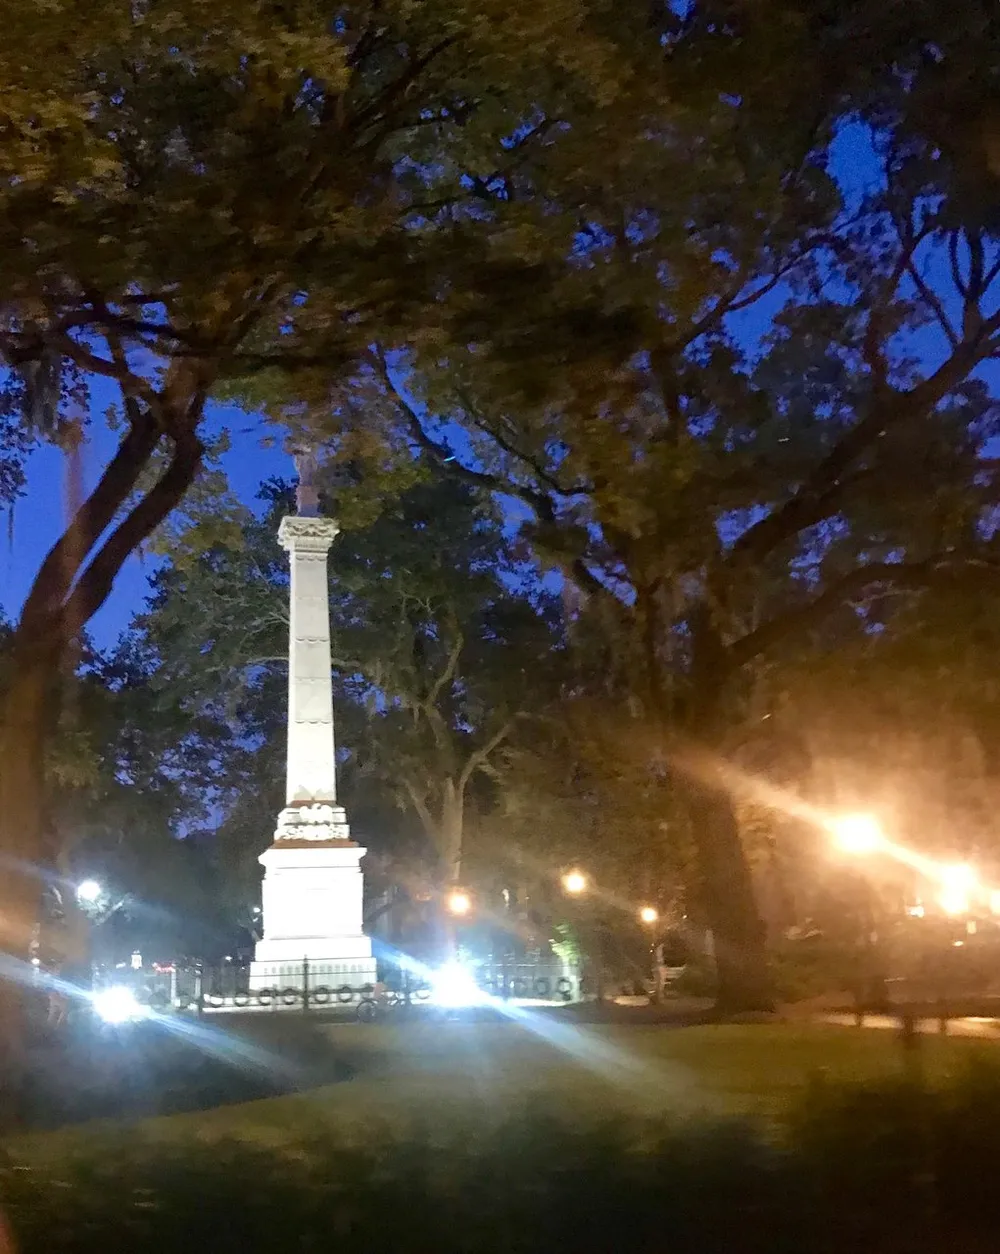 The image depicts a nighttime view of a tall monument illuminated by artificial lights and surrounded by trees with visible lens flare from the lights